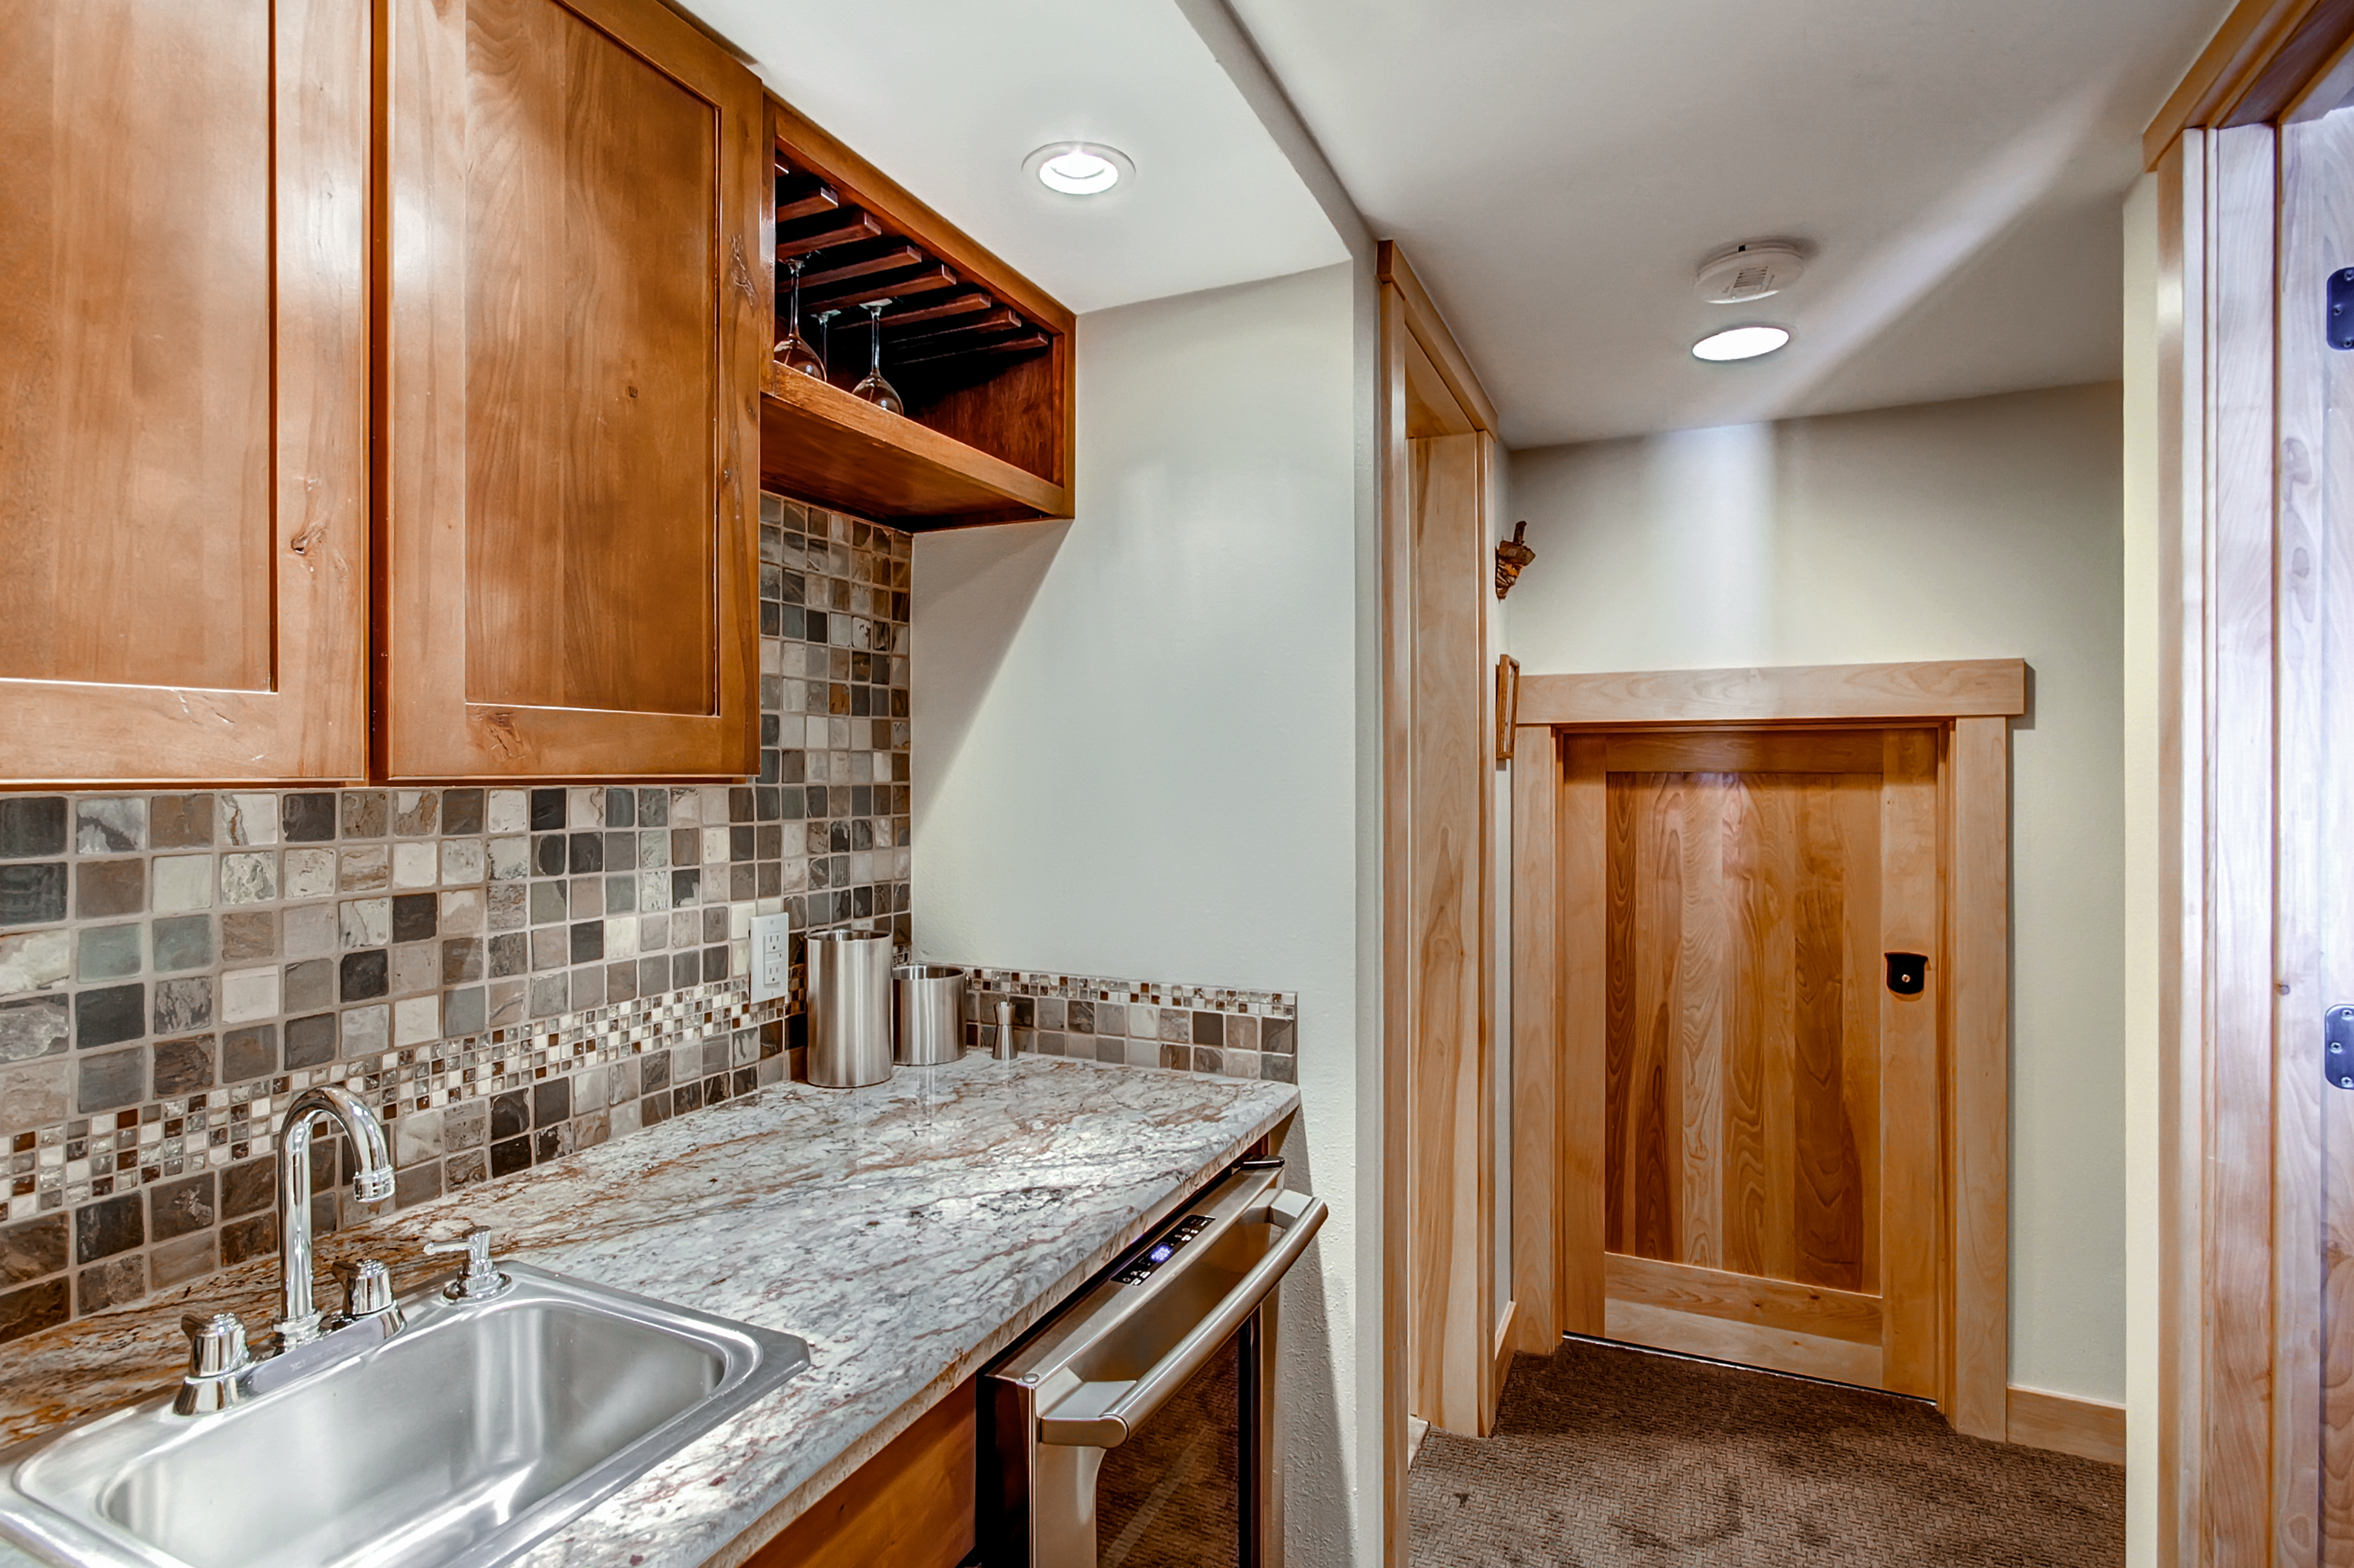 Additional view of wet bar in lower level - 4 O’Clock Lodge D26 Breckenridge Vacation Rental